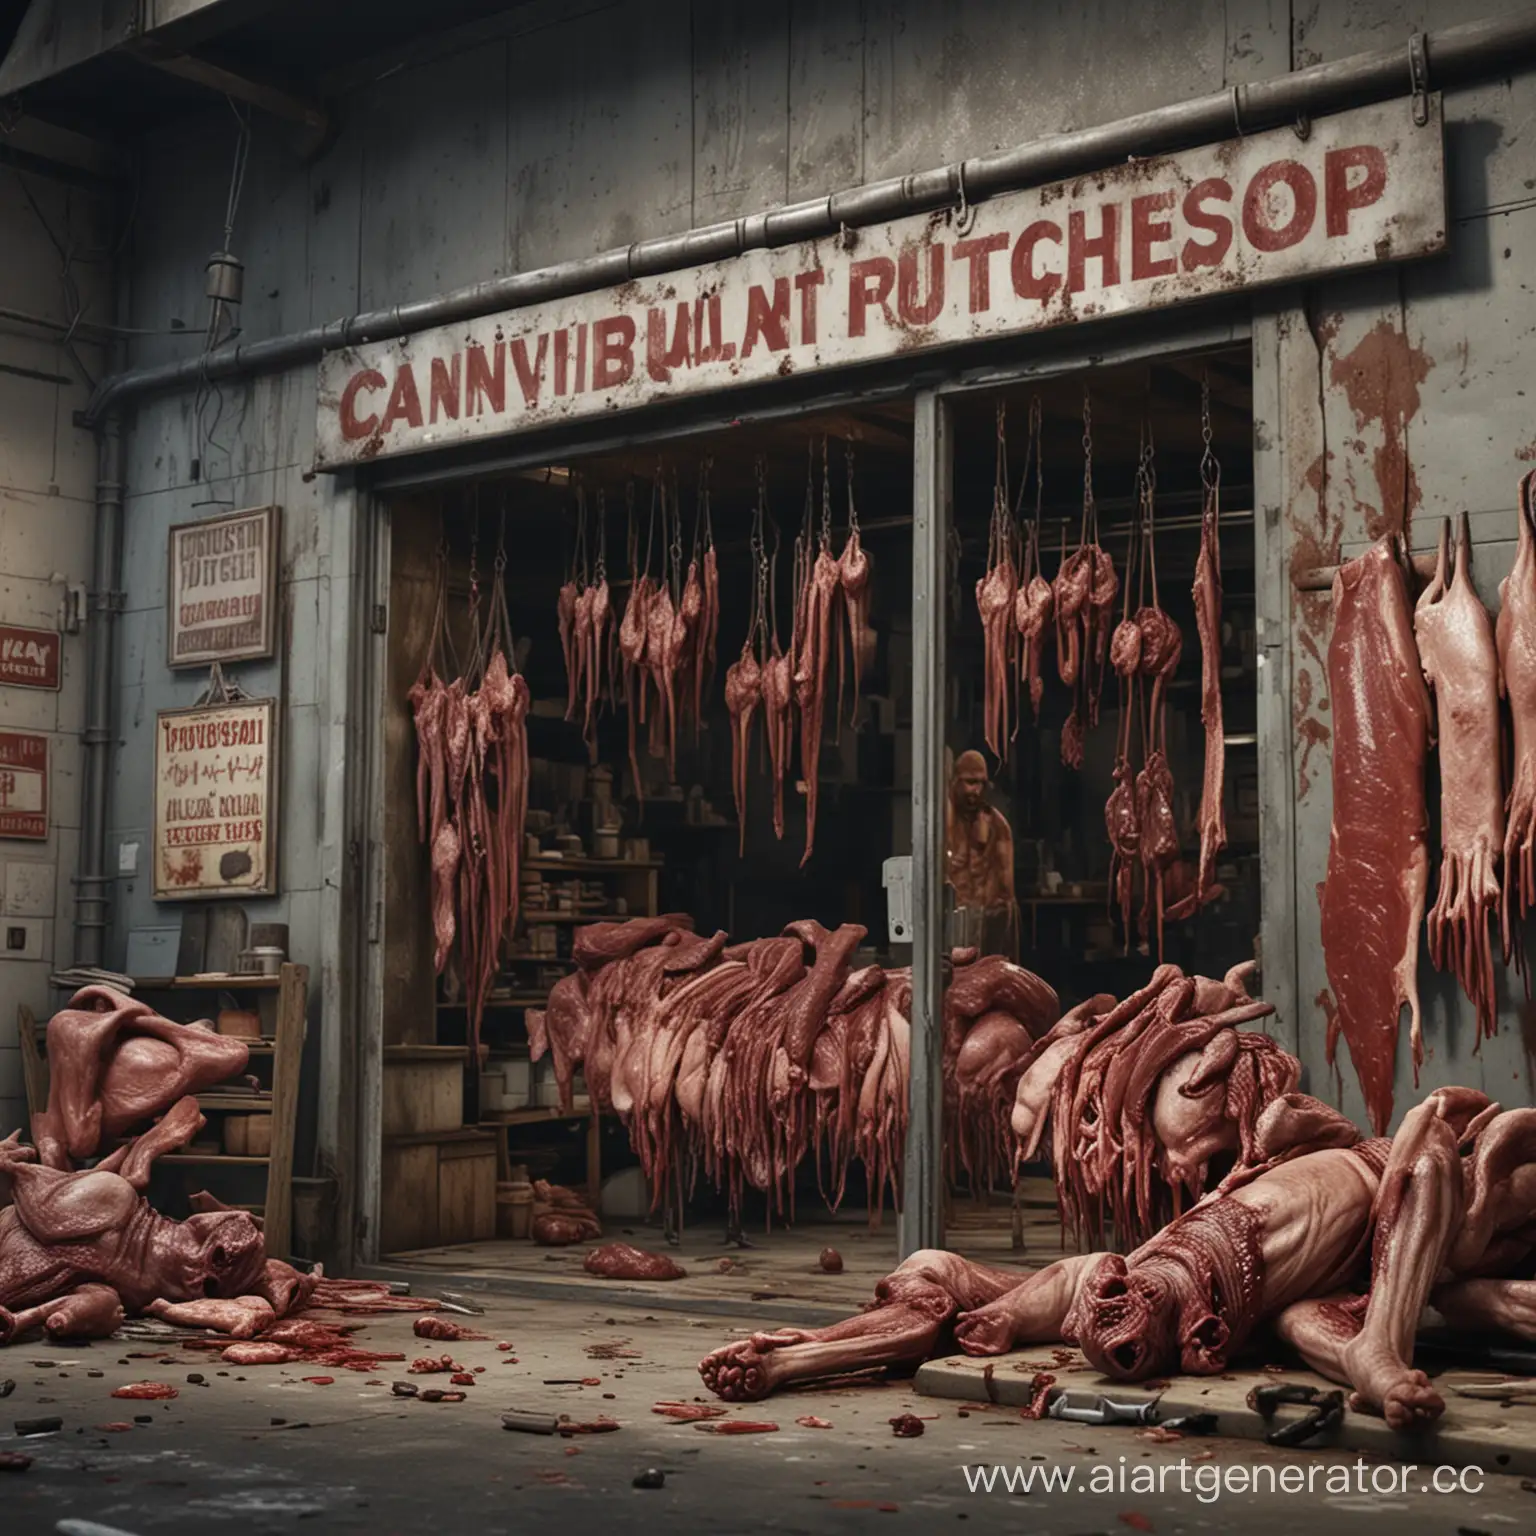 Realistic-Hyperdetailed-4K-HD-Cannibal-Butcher-Shop